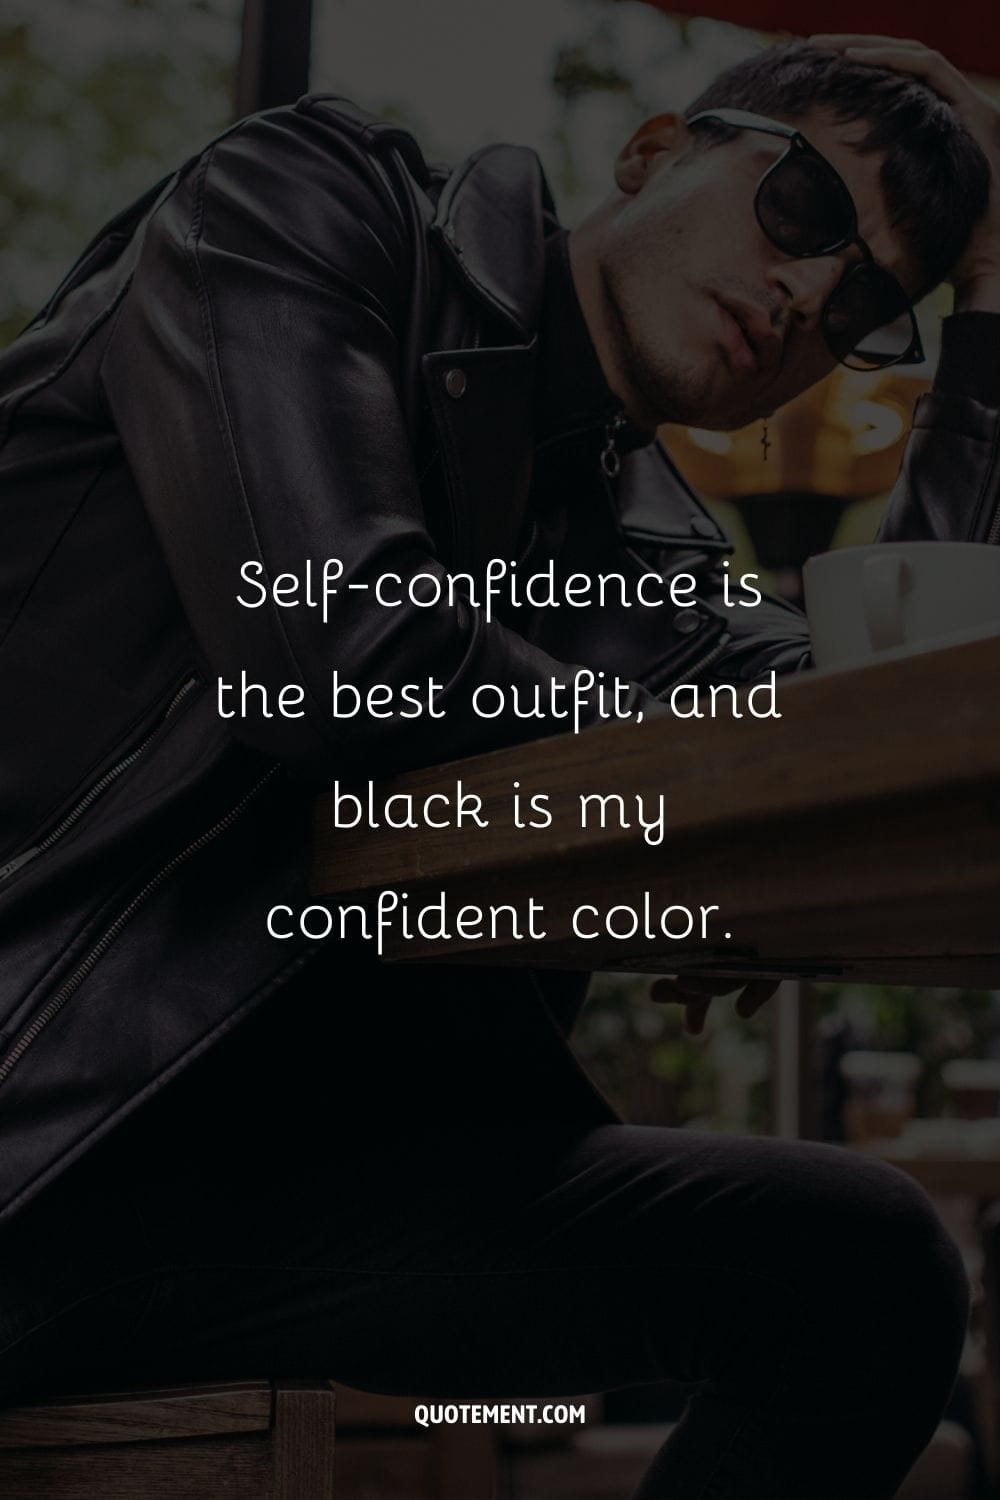 Self-confidence is the best outfit, and black is my confident color.